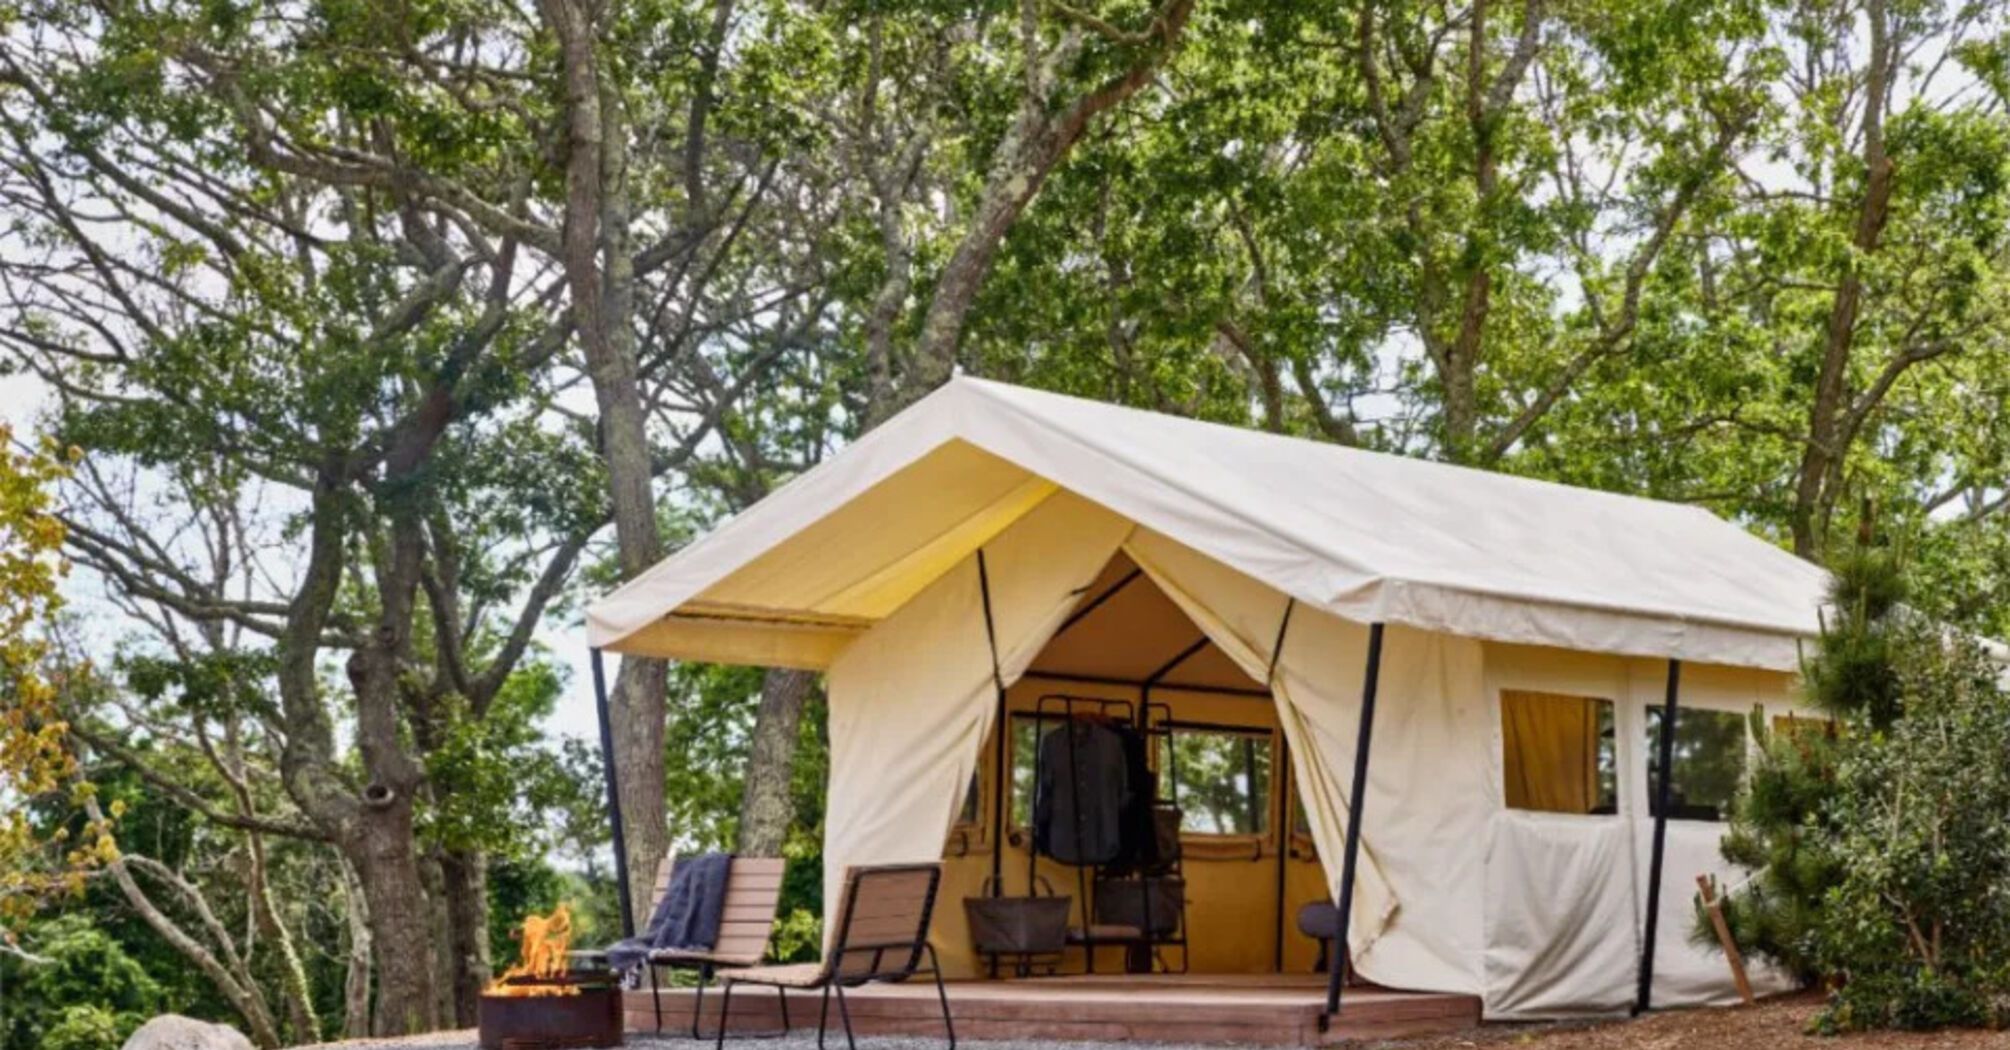 Exclusive partnership between Hilton and AutoCamp: luxurious camping experience at nine iconic locations in the USA